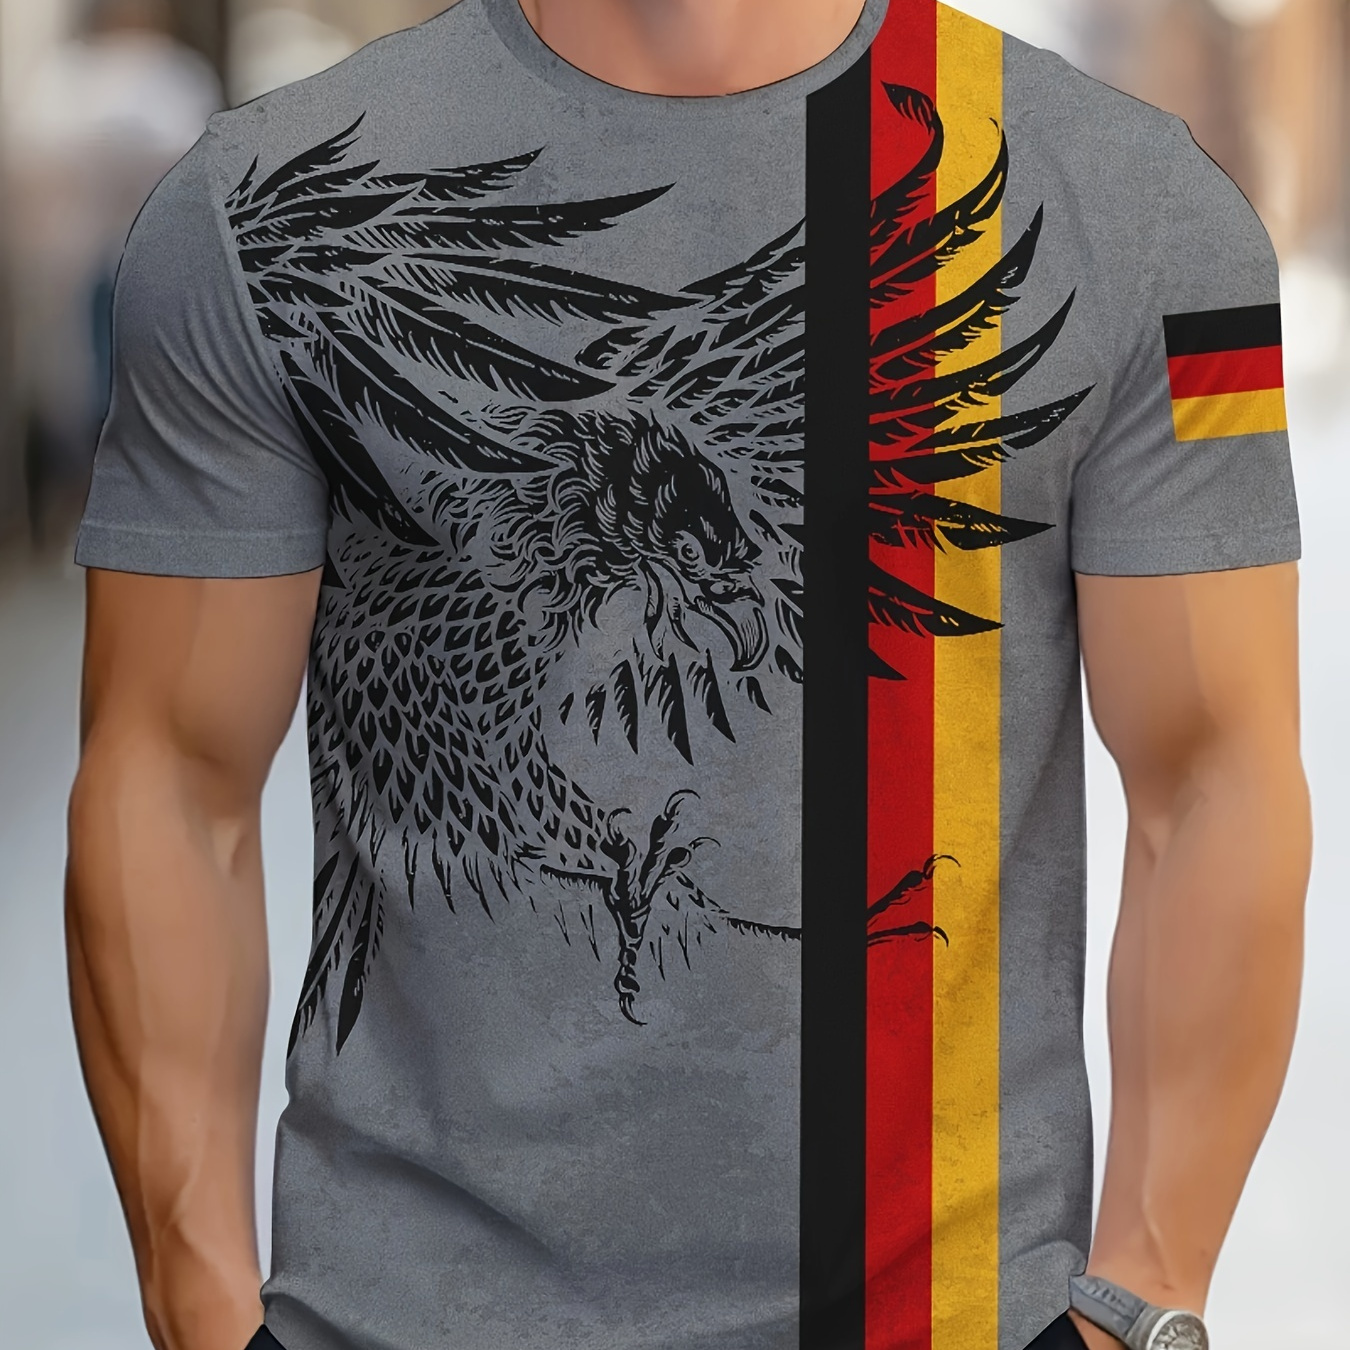 

Men's Eagle Graphic Print T-shirt, Short Sleeve Crew Neck Tee, Men's Clothing For Summer Outdoor